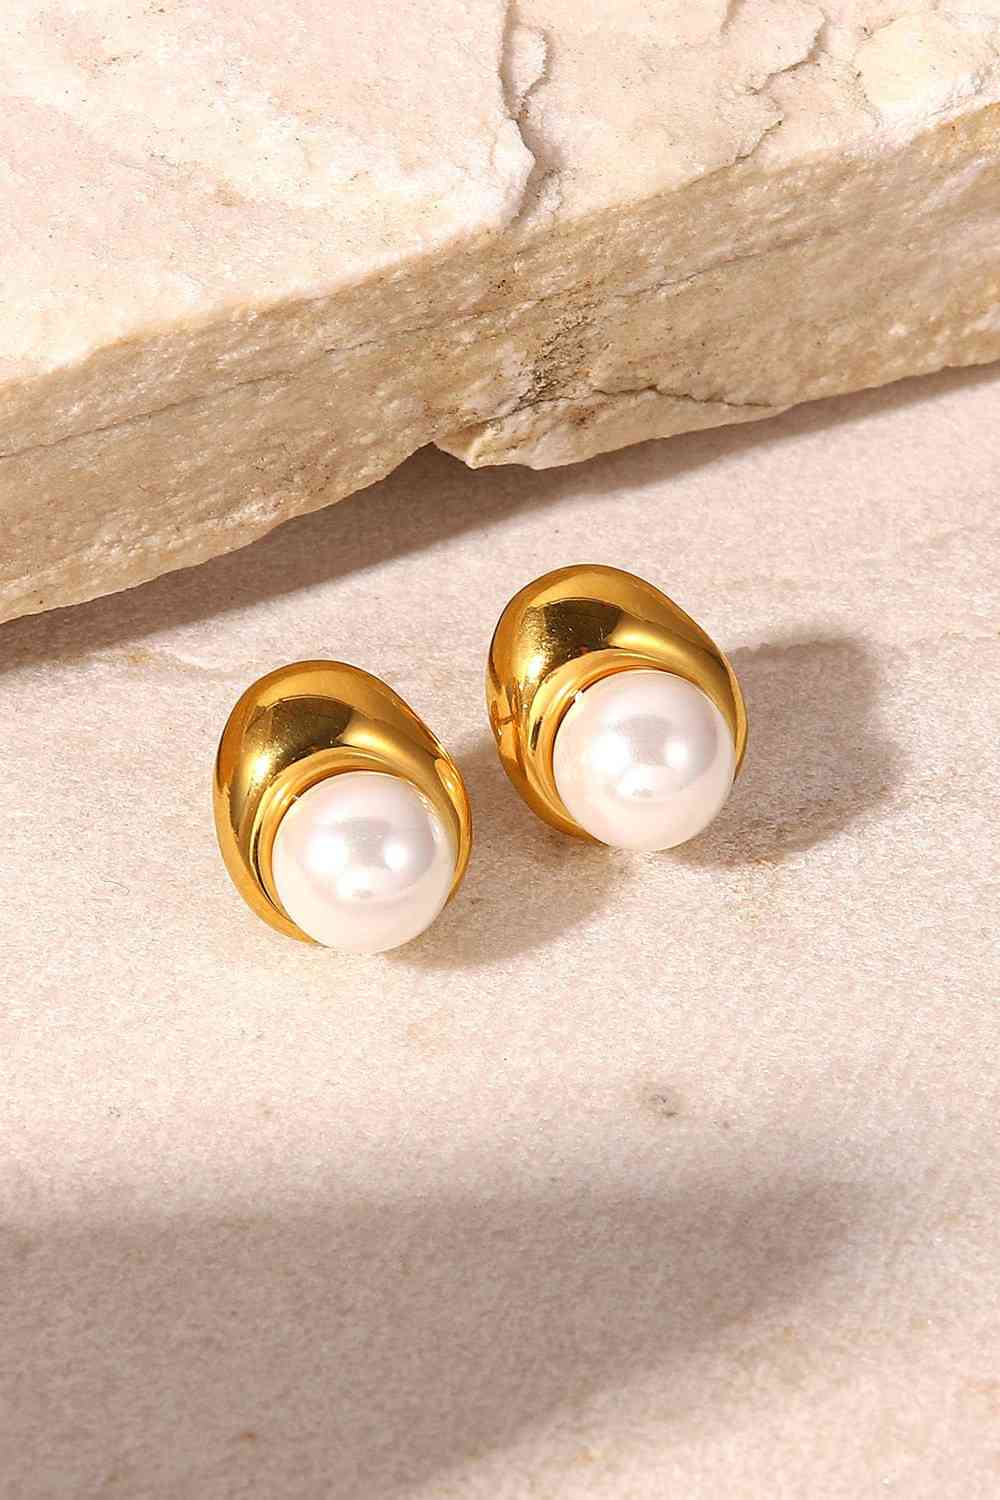 Lovelier Than Ever Pearl Stud Earrings - Kawaii Stop - Durable and Stylish, Elegant Gift Idea, Elegant Pearl Earrings, Everyday Elegance, Exquisite Design, Fashion Accessories, Fashion Forward, Glamorous Touch, Gold-Plated Accents, High-Quality Craftsmanship, Irresistible Charm, Jack&Din, Pearl Stud Earrings, Perfect for All Occasions, Ship From Overseas, Sophisticated Style, Stainless Steel Jewelry, Timeless Beauty, Women's Jewelry